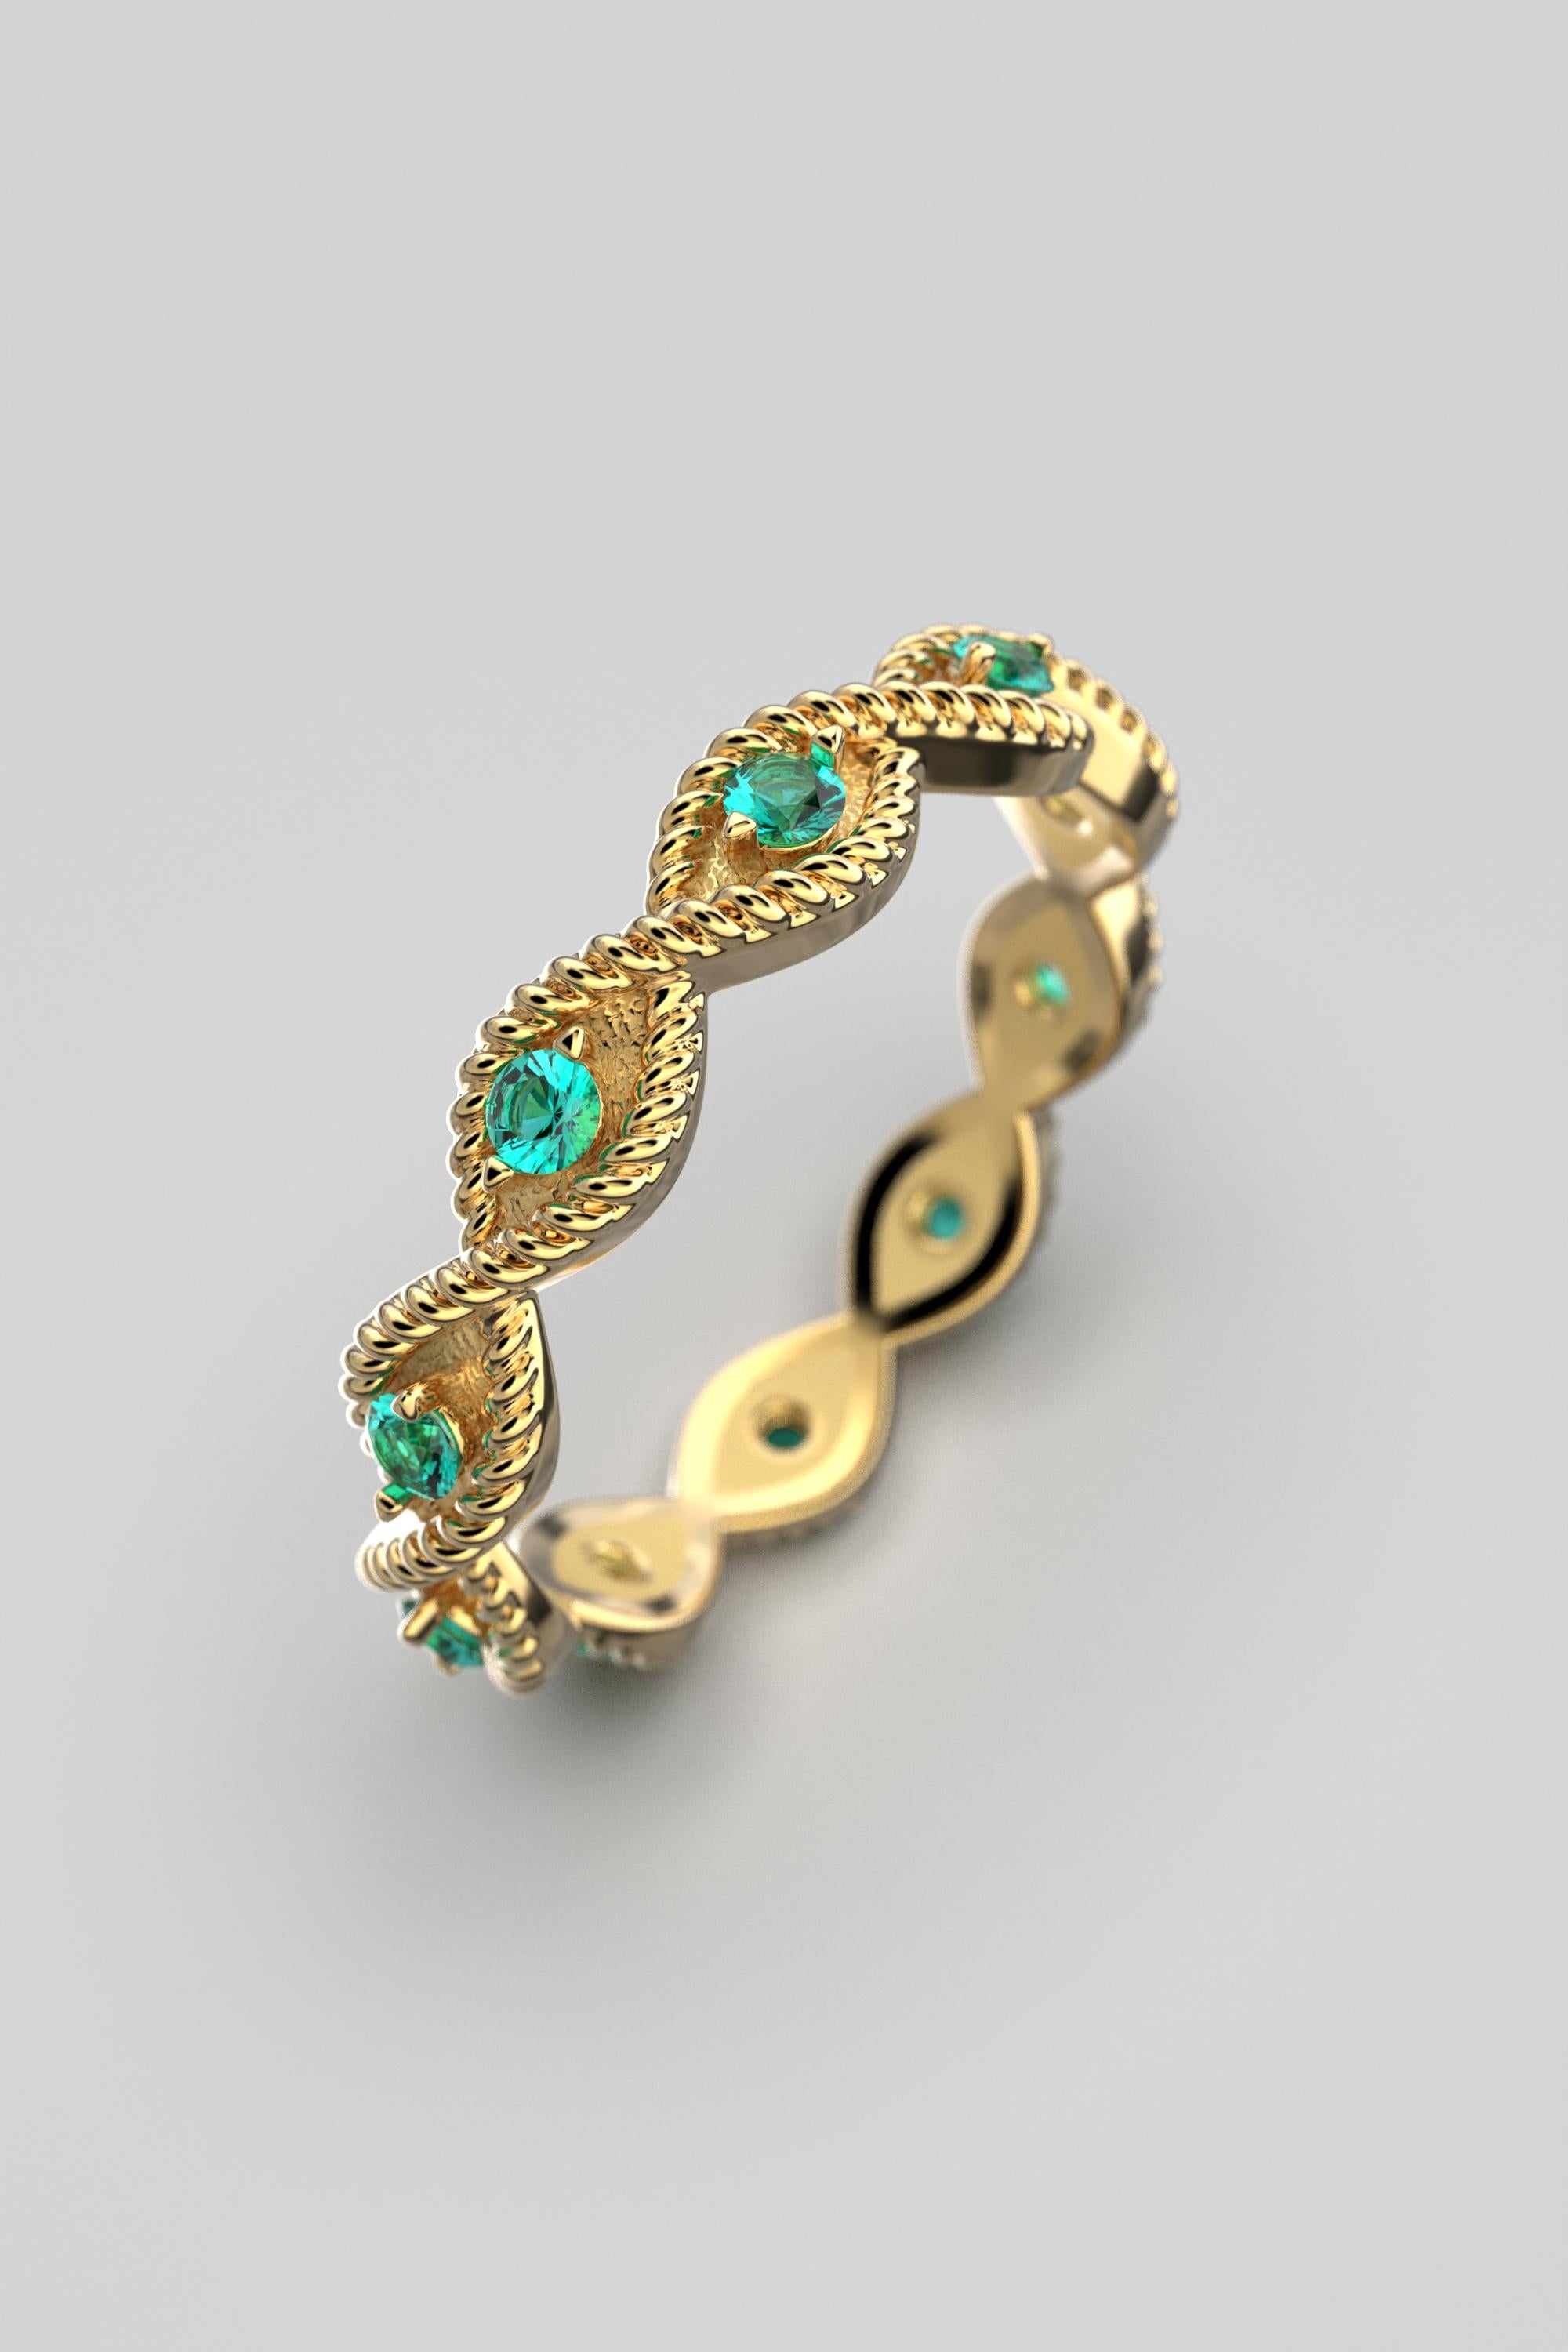 For Sale:  18k Solid Gold Emerald Ring Made in Italy, Eternity Emerald Gold Band 2